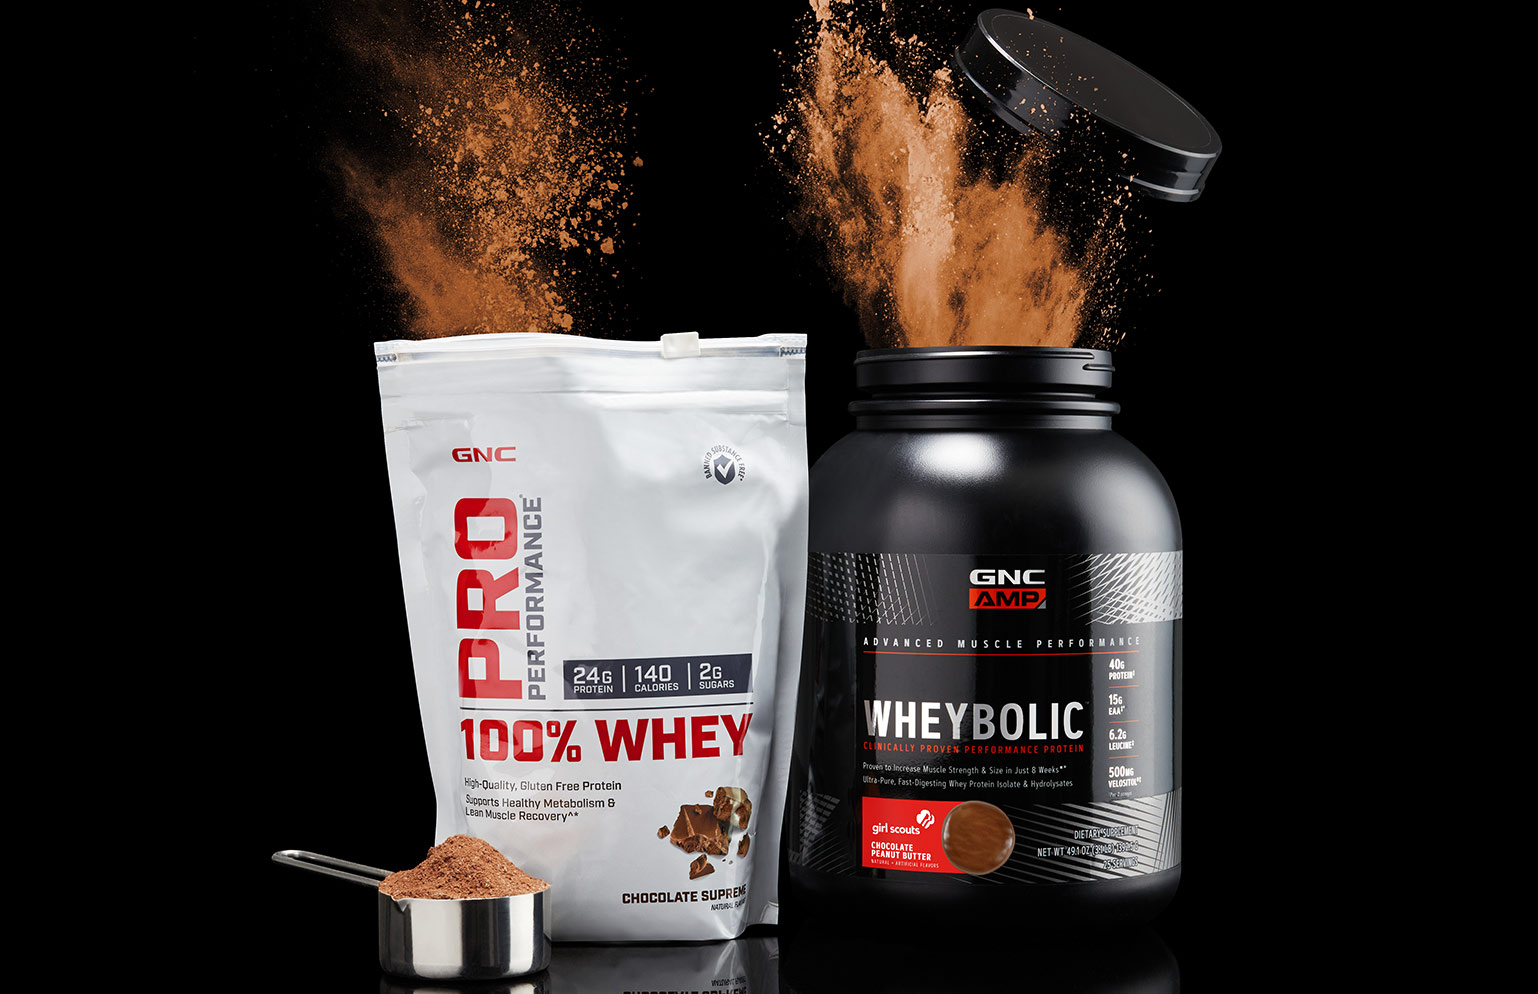 GNC Protein Shakes Reviews - Whey Protein Powders Guide